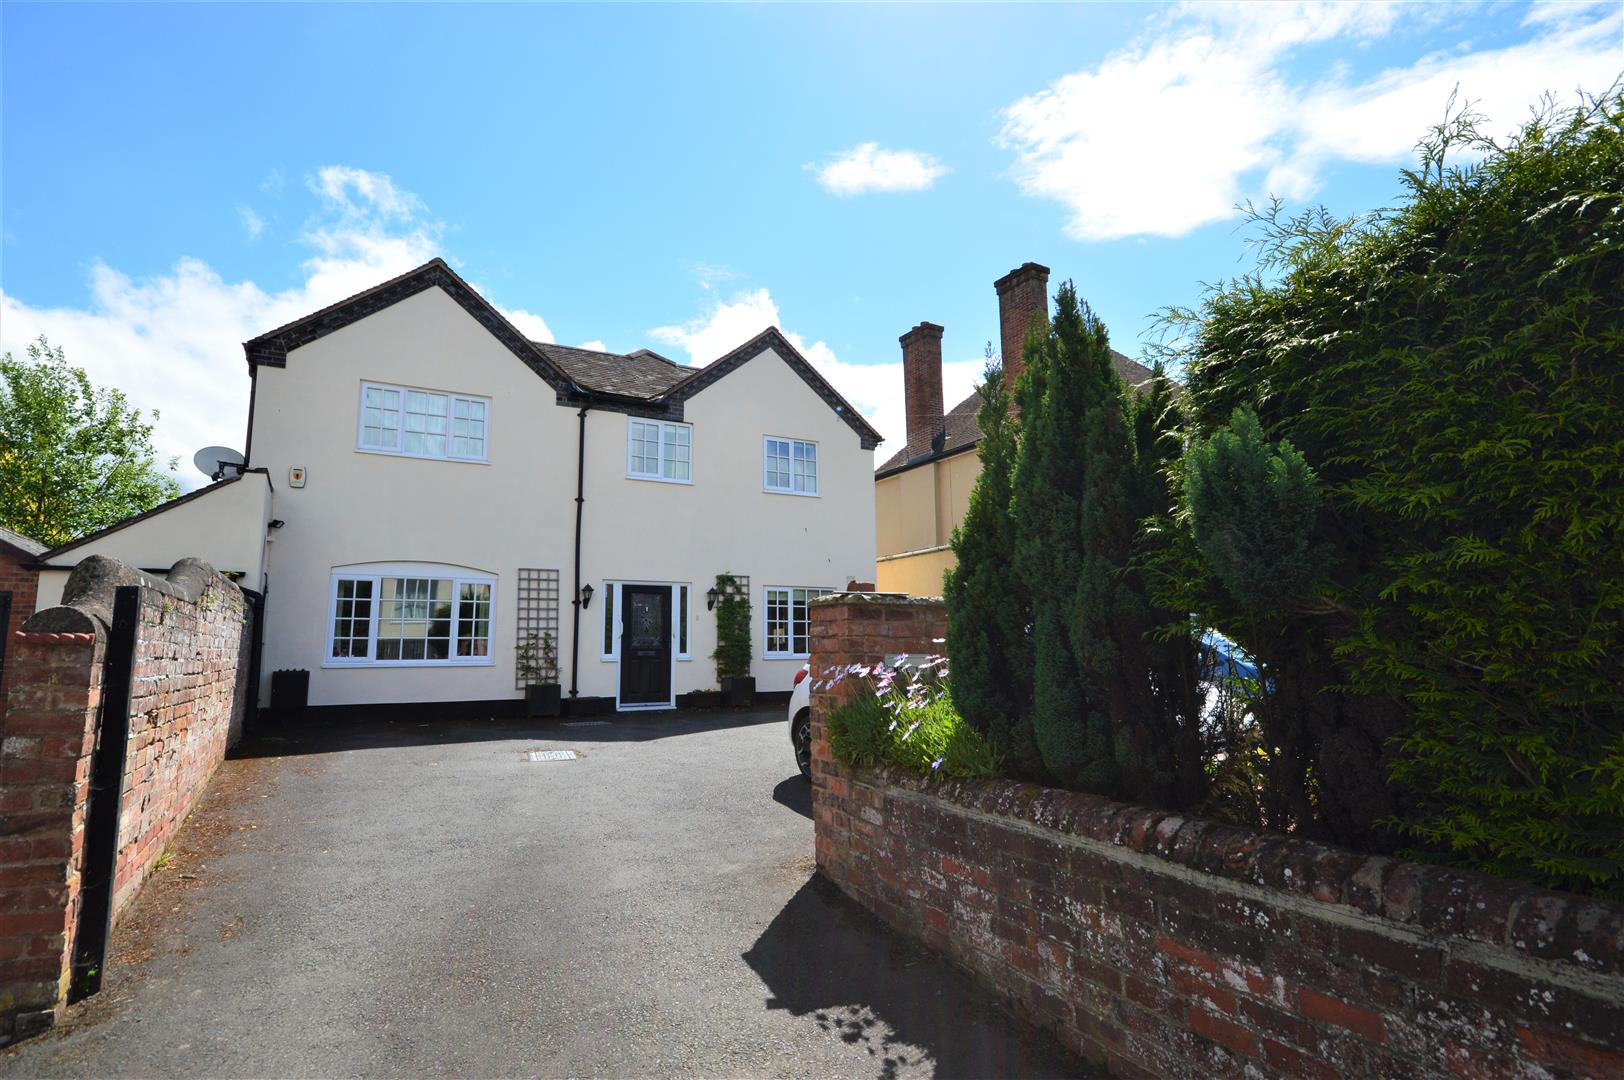 4 bed town house for sale in Leominster, HR6